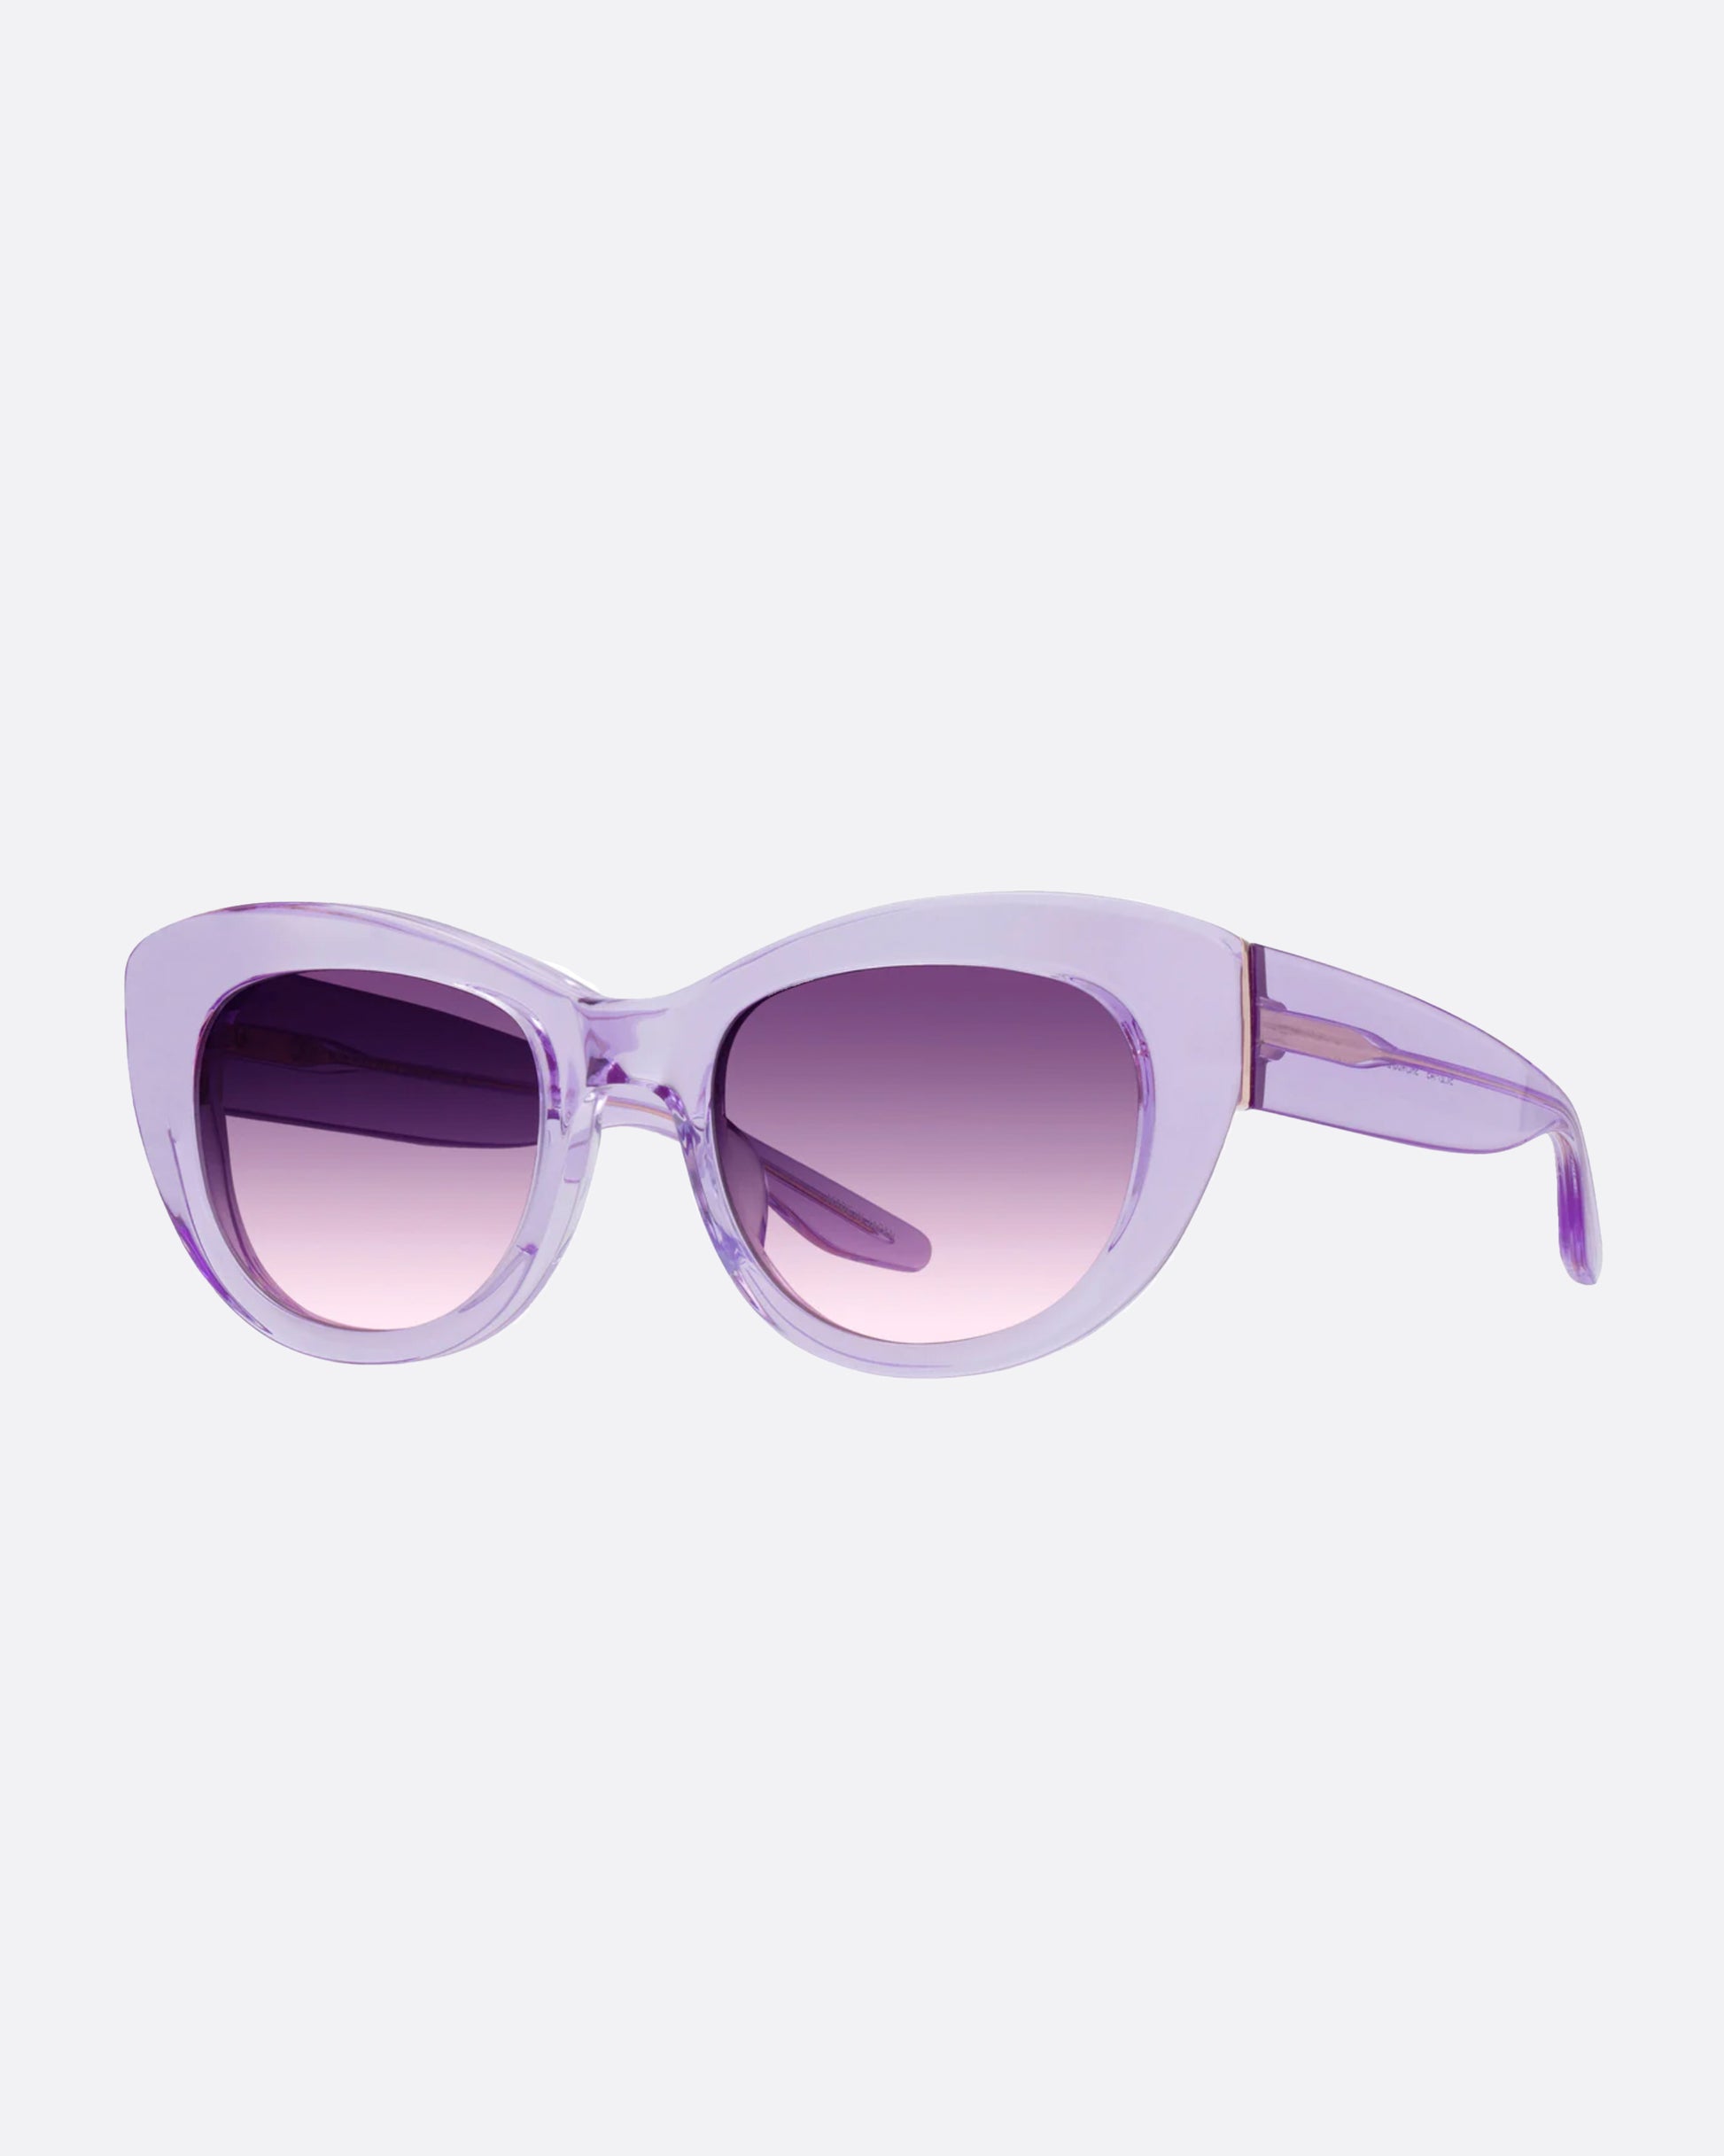 These sheer lilac frames have 24k gold plated titanium details, need we say more?